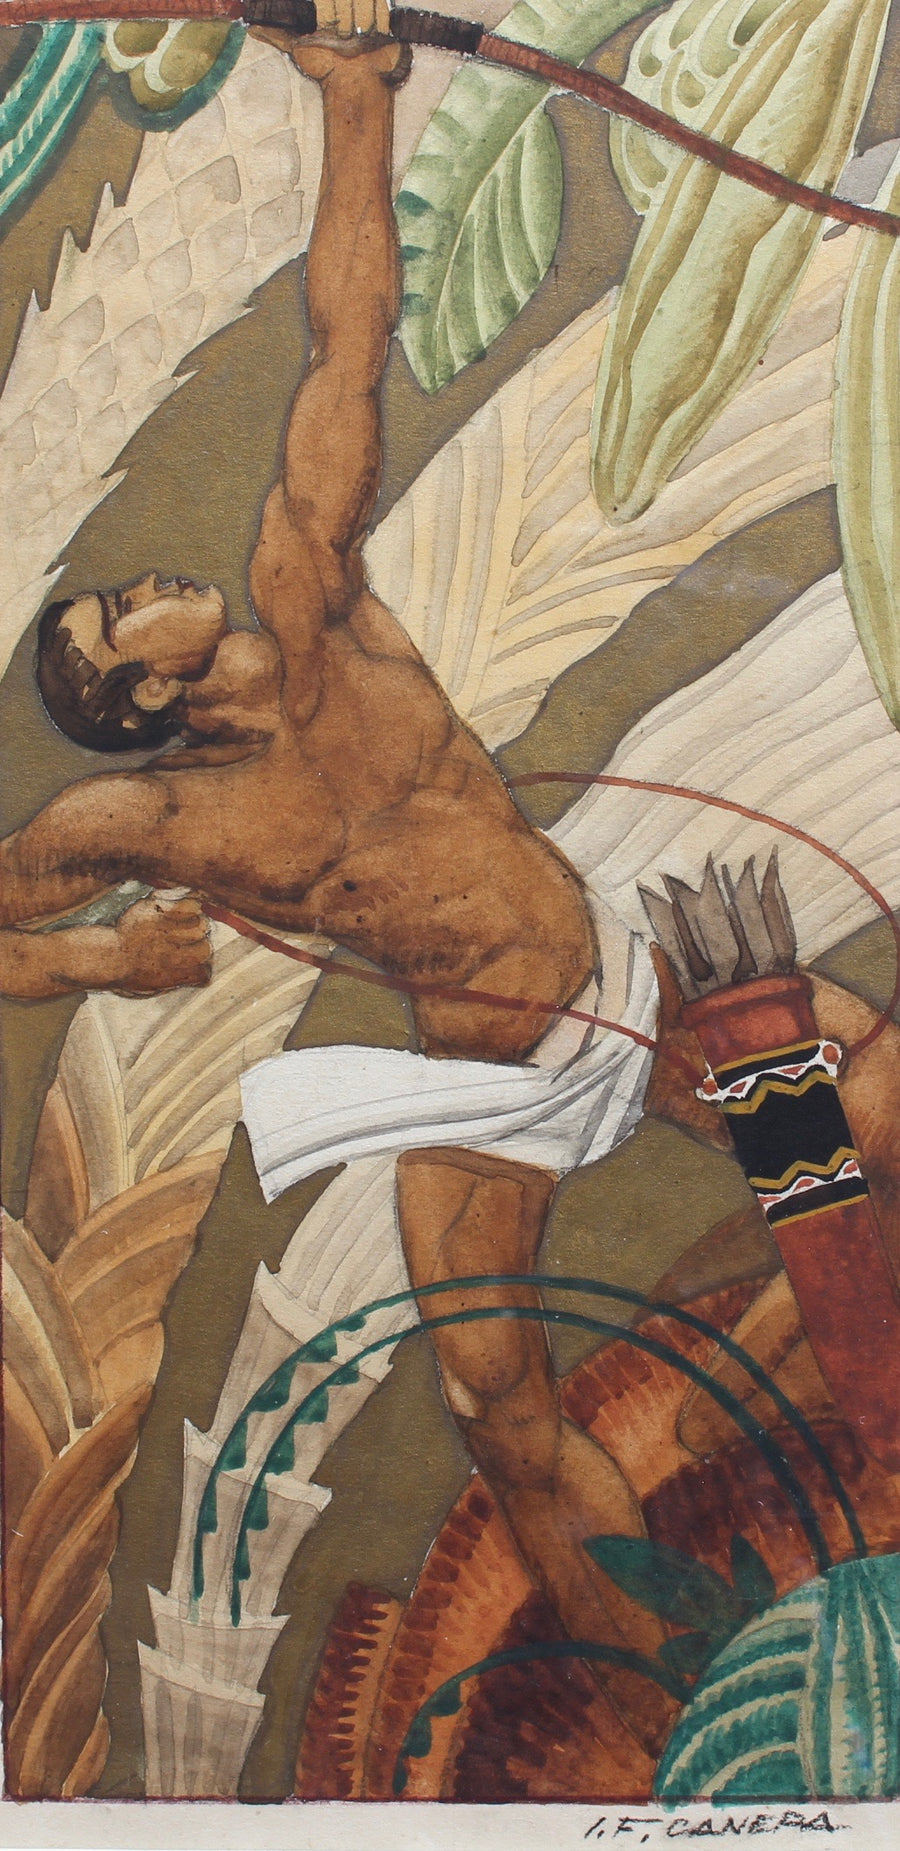 'The Archer' Art Deco Style Painting by Jean-Frédéric Canepa (circa 1930s)